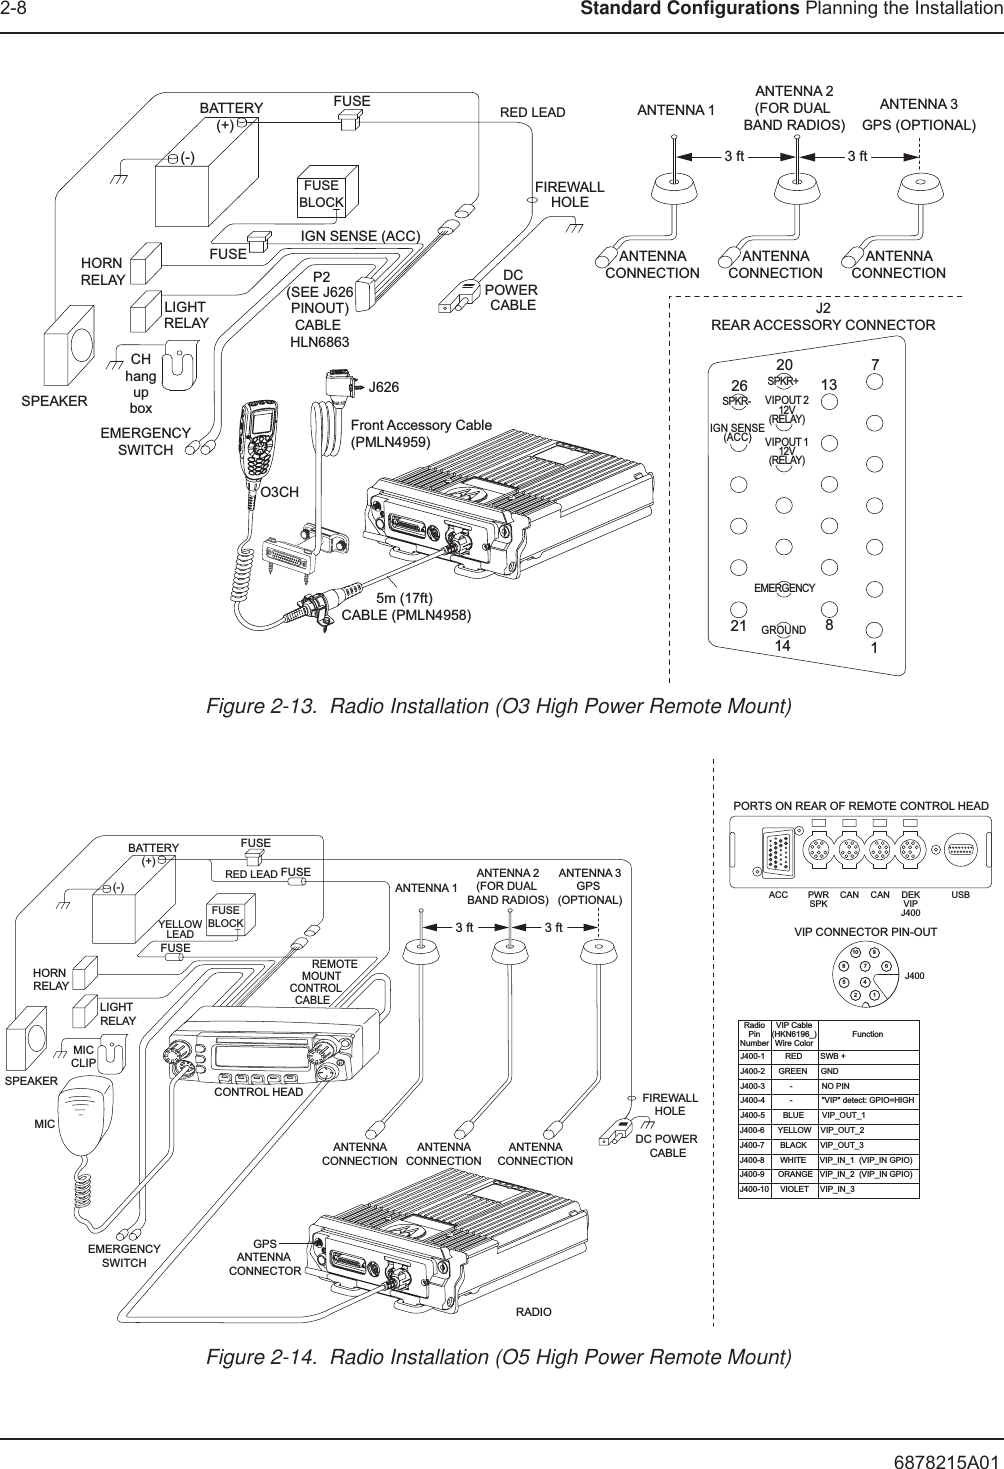 6878215A012-8 Standard Configurations Planning the InstallationFigure 2-13.  Radio Installation (O3 High Power Remote Mount)Figure 2-14.  Radio Installation (O5 High Power Remote Mount)BATTERYHORN RELAYLIGHT RELAYCHhangupboxSPEAKEREMERGENCYSWITCHFUSEFUSEBLOCK(+)(-)RED LEADFUSEFIREWALLHOLEIGN SENSE (ACC)P2(SEE J626PINOUT)CABLE HLN6863J626Front Accessory Cable(PMLN4959)DCPOWER CABLEO3CH5m (17ft) CABLE (PMLN4958)ANTENNA CONNECTION ANTENNA 1J2REAR ACCESSORY CONNECTOR1781413202126SPKR-SPKR+VIPOUT 212V(RELAY)VIPOUT 112V(RELAY)GROUNDEMERGENCYIGN SENSE(ACC)ANTENNA CONNECTION ANTENNA 2(FOR DUAL BAND RADIOS)ANTENNA CONNECTION ANTENNA 3GPS (OPTIONAL)3 ft 3 ftEMERGENCYSWITCHFIREWALLHOLEANTENNA CONNECTION GPSANTENNA CONNECTORDC POWER CABLEANTENNA CONNECTION RADIOCONTROL HEADBATTERYHORN RELAYLIGHT RELAYMICCLIPSPEAKERMICRED LEADFUSEBLOCKYELLOWLEAD(+)(-)FUSEFUSE               REMOTE      MOUNT     CONTROL   CABLEANTENNA 1ANTENNA 2(FOR DUAL BAND RADIOS)ANTENNA CONNECTION ANTENNA 3GPS (OPTIONAL)FUSEPWRSPKCAN CAN DEKVIPJ400ACC USBPORTS ON REAR OF REMOTE CONTROL HEADVIP CONNECTOR PIN-OUTJ4006910742581J400-1         RED        SWB +J400-2      GREEN      GNDJ400-3           -             NO PINJ400-4           -             &quot;VIP&quot; detect: GPIO=HIGHJ400-5        BLUE        VIP_OUT_1 J400-6      YELLOW    VIP_OUT_2J400-7       BLACK      VIP_OUT_3J400-8       WHITE      VIP_IN_1  (VIP_IN GPIO)J400-9      ORANGE   VIP_IN_2  (VIP_IN GPIO)J400-10     VIOLET     VIP_IN_3 RadioPinNumberVIP Cable(HKN6196_)Wire ColorFunction3 ft 3 ft